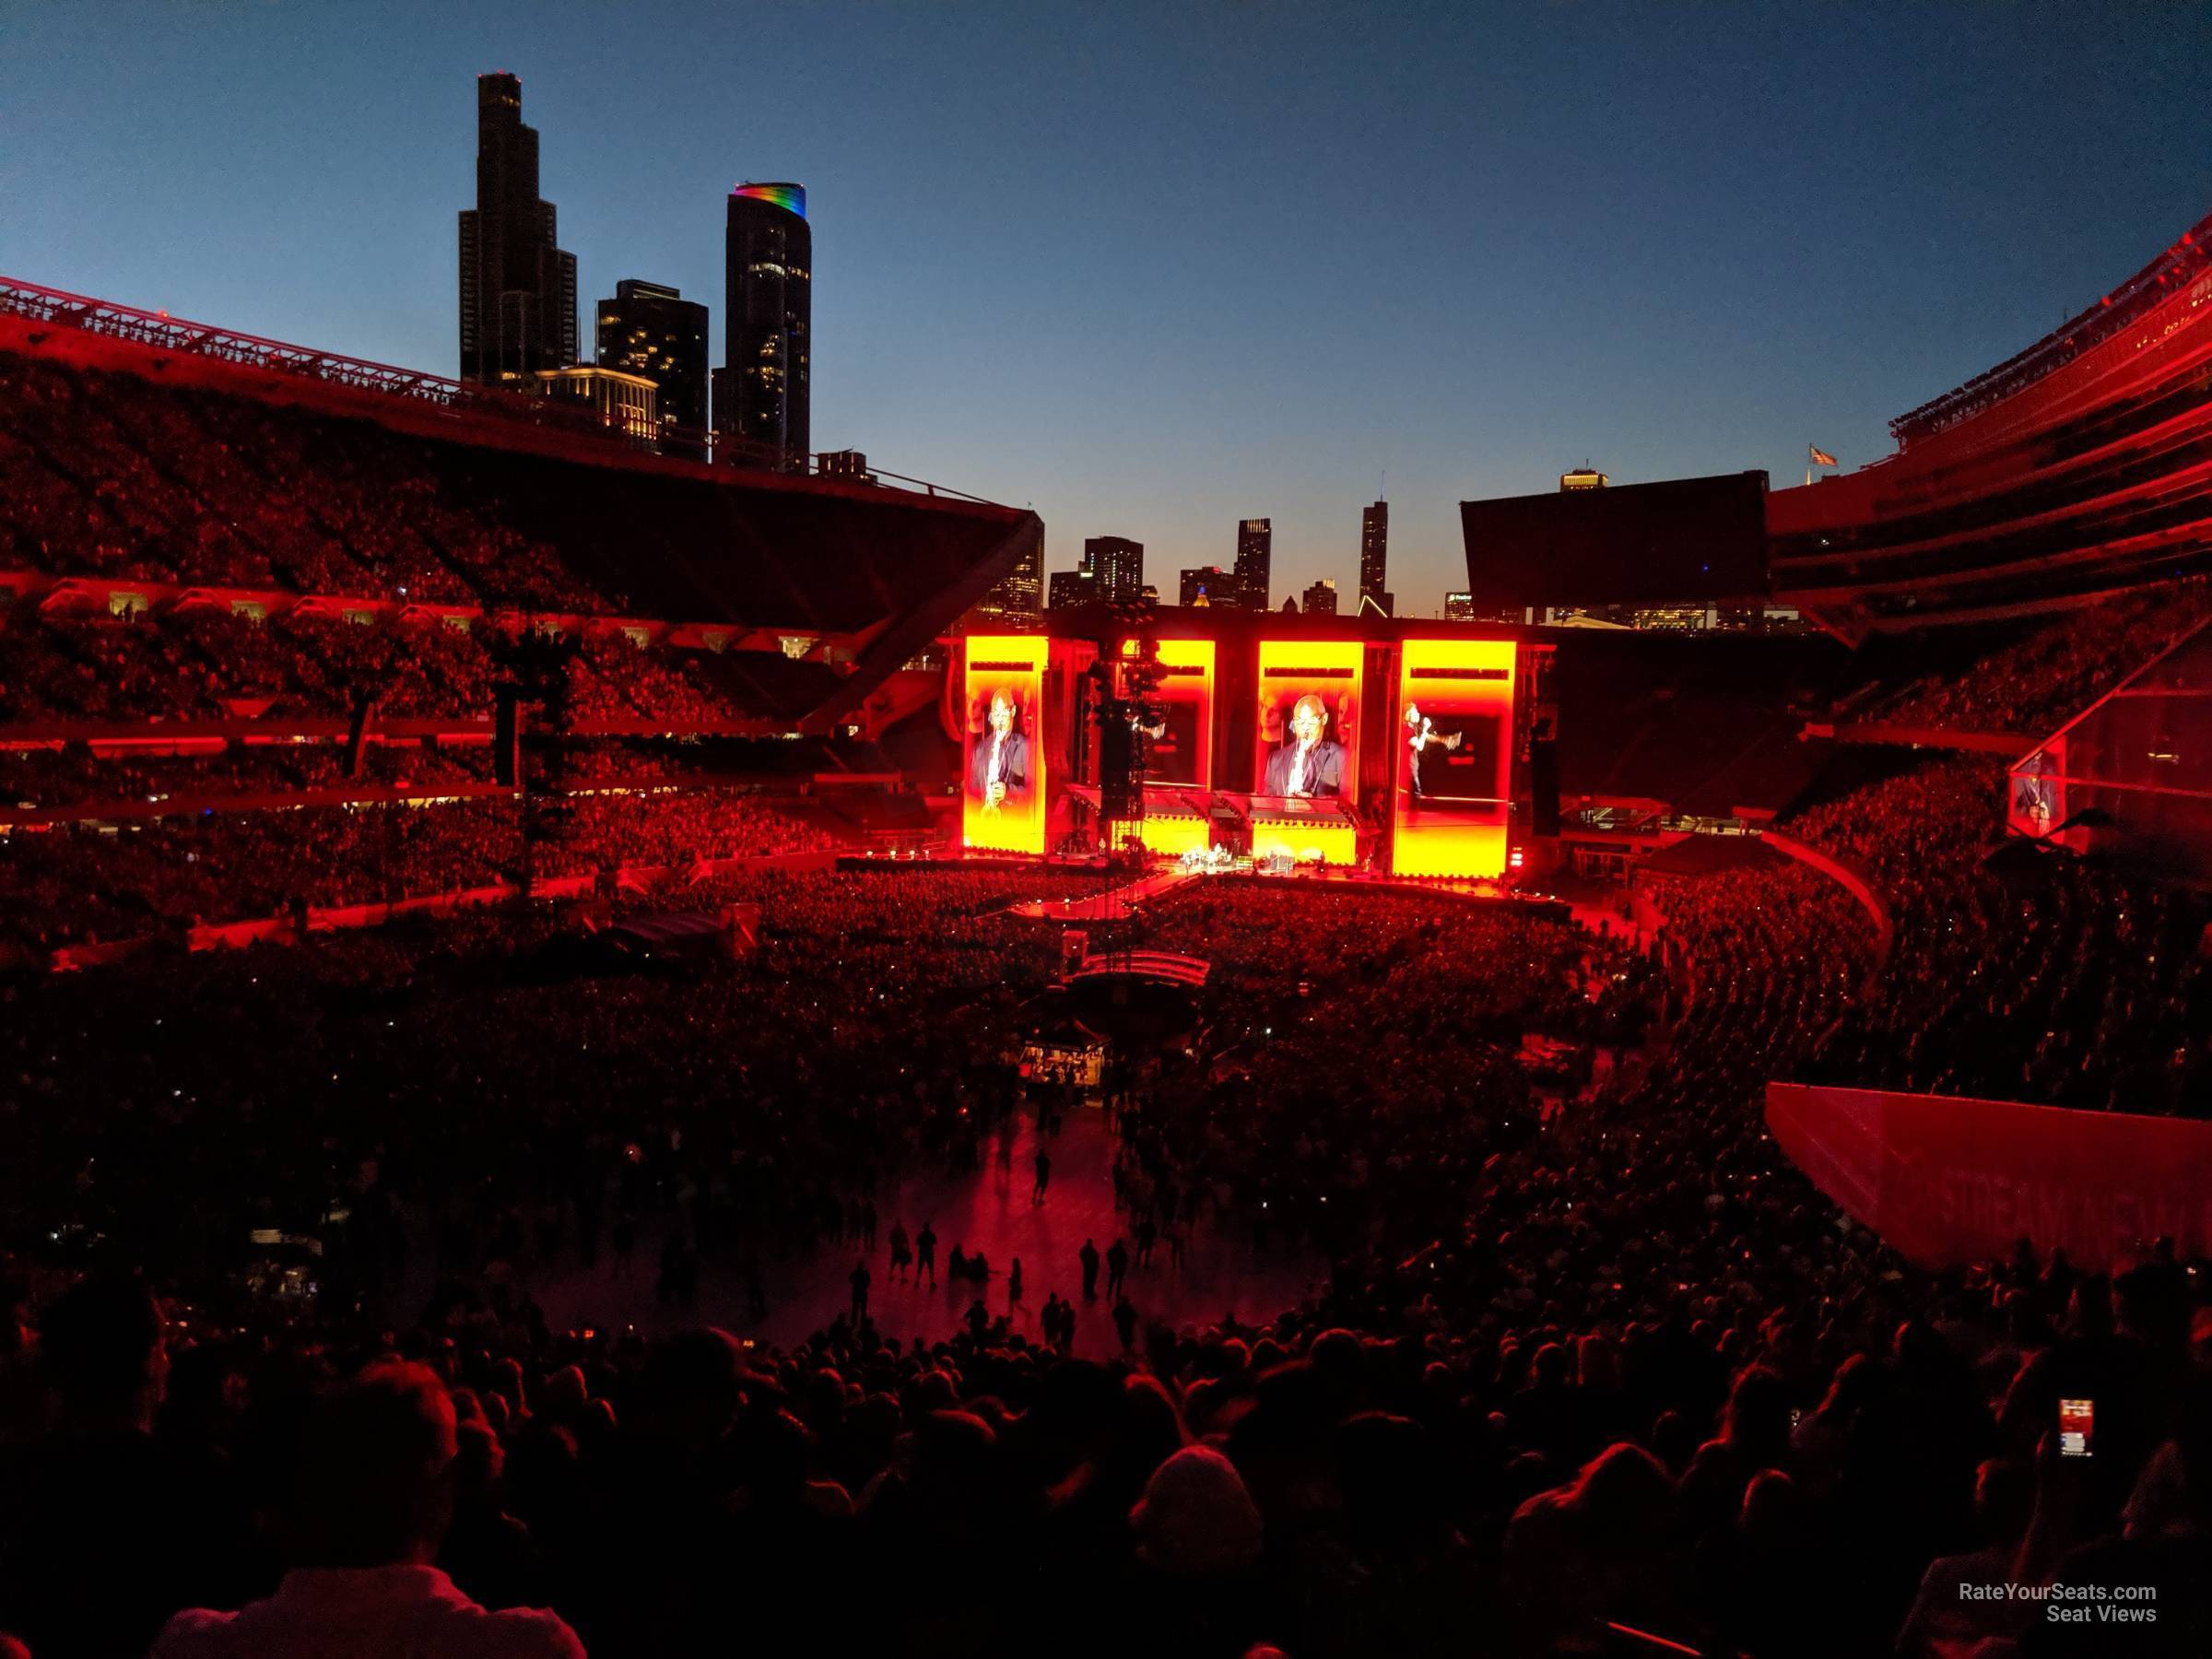 section 319, row 8 seat view  for concert - soldier field